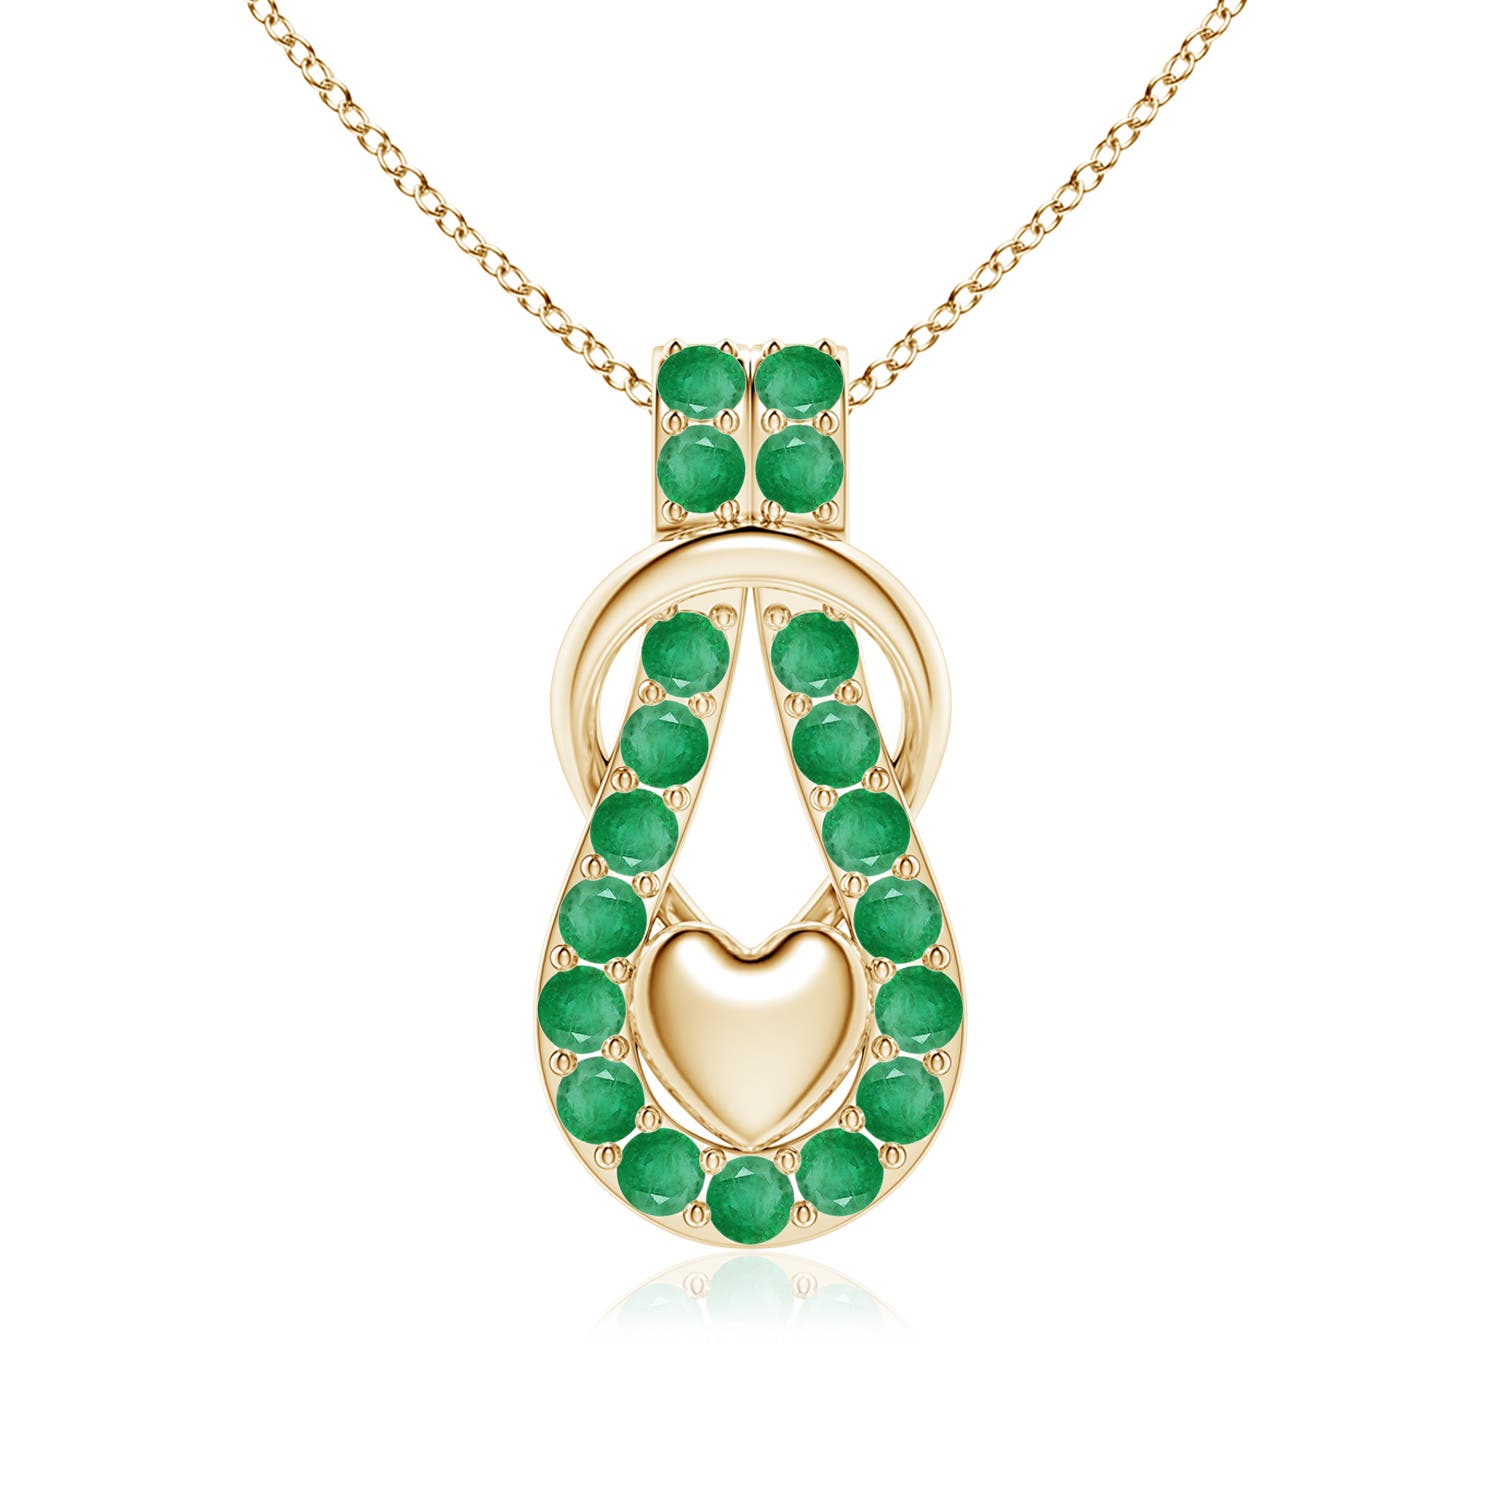 A - Emerald / 1.9 CT / 18 KT Yellow Gold